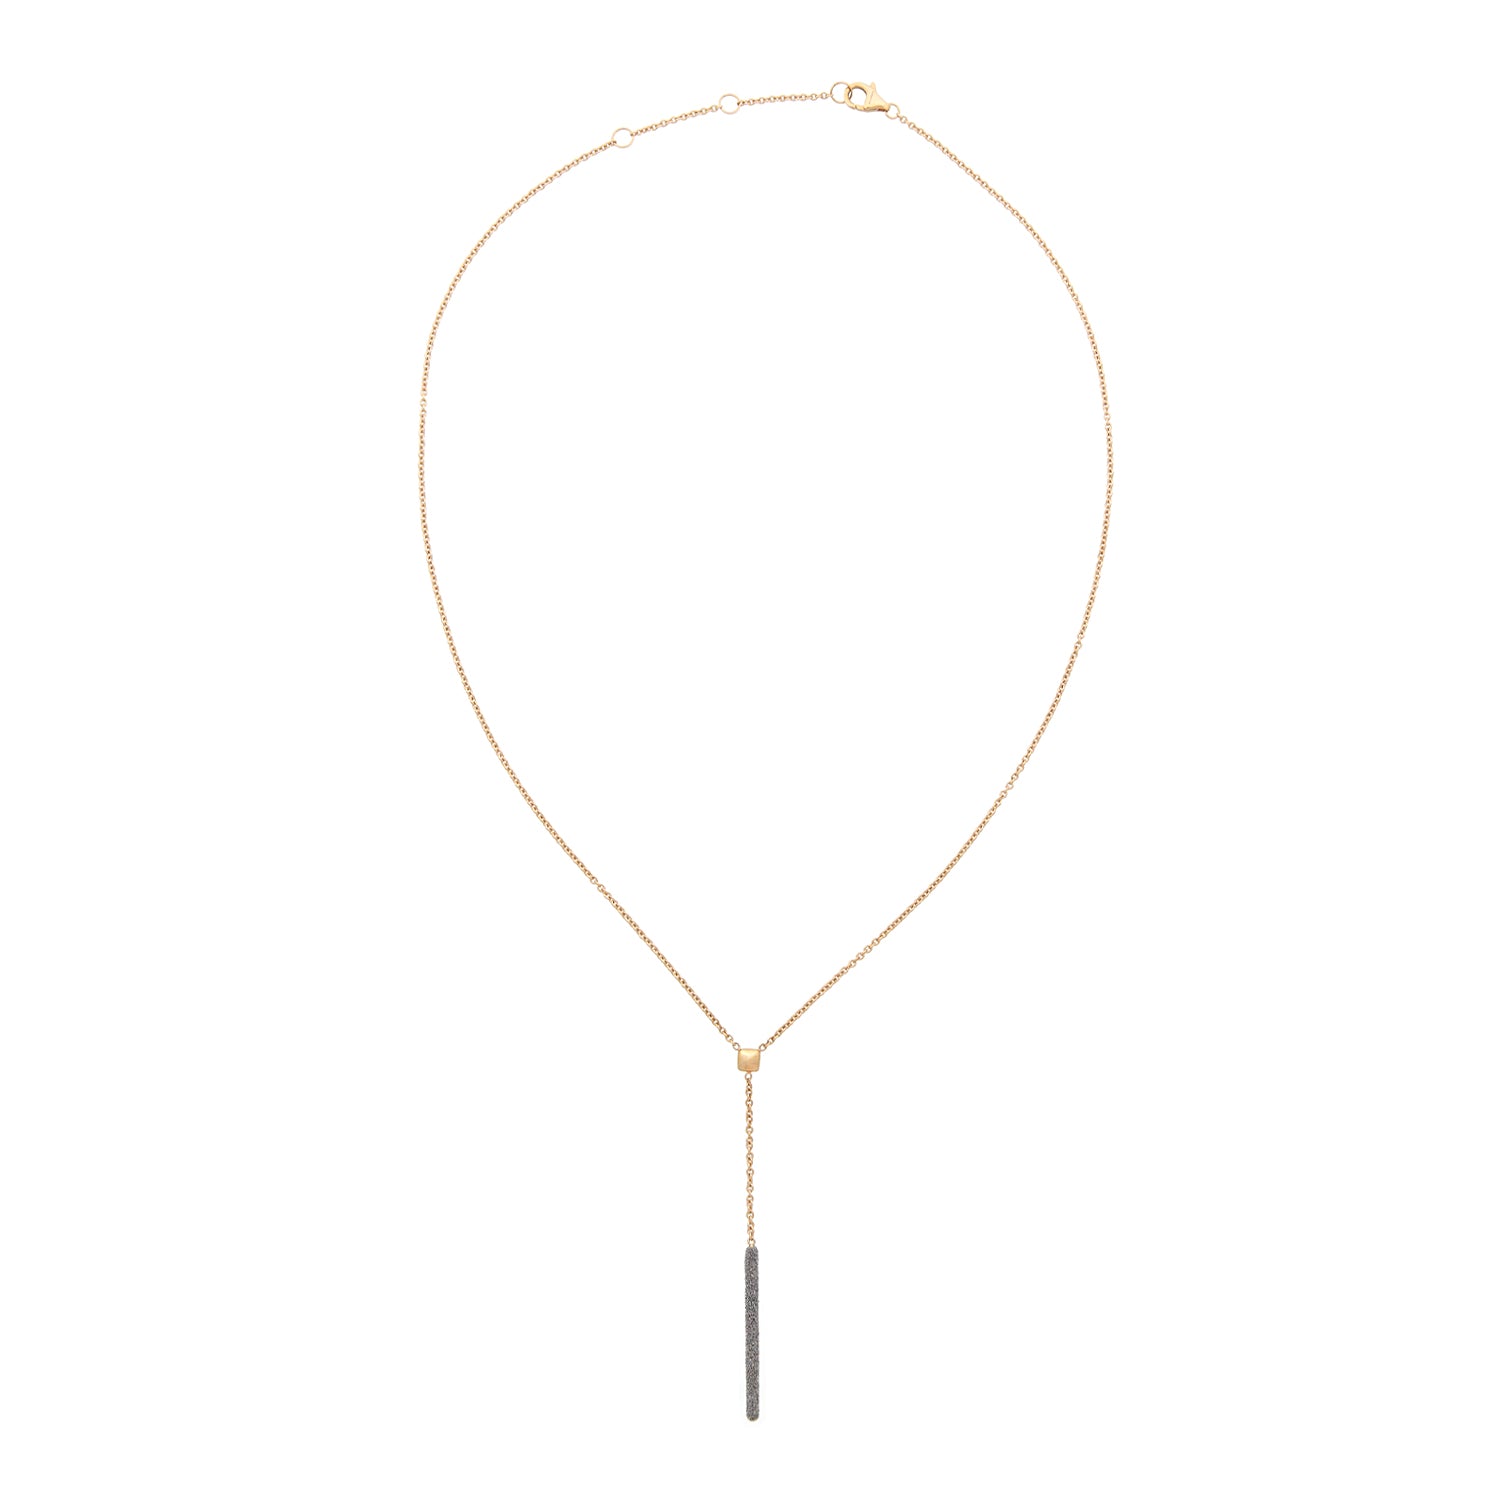 ROSE GOLD Y-NECKLACE WITH BAR